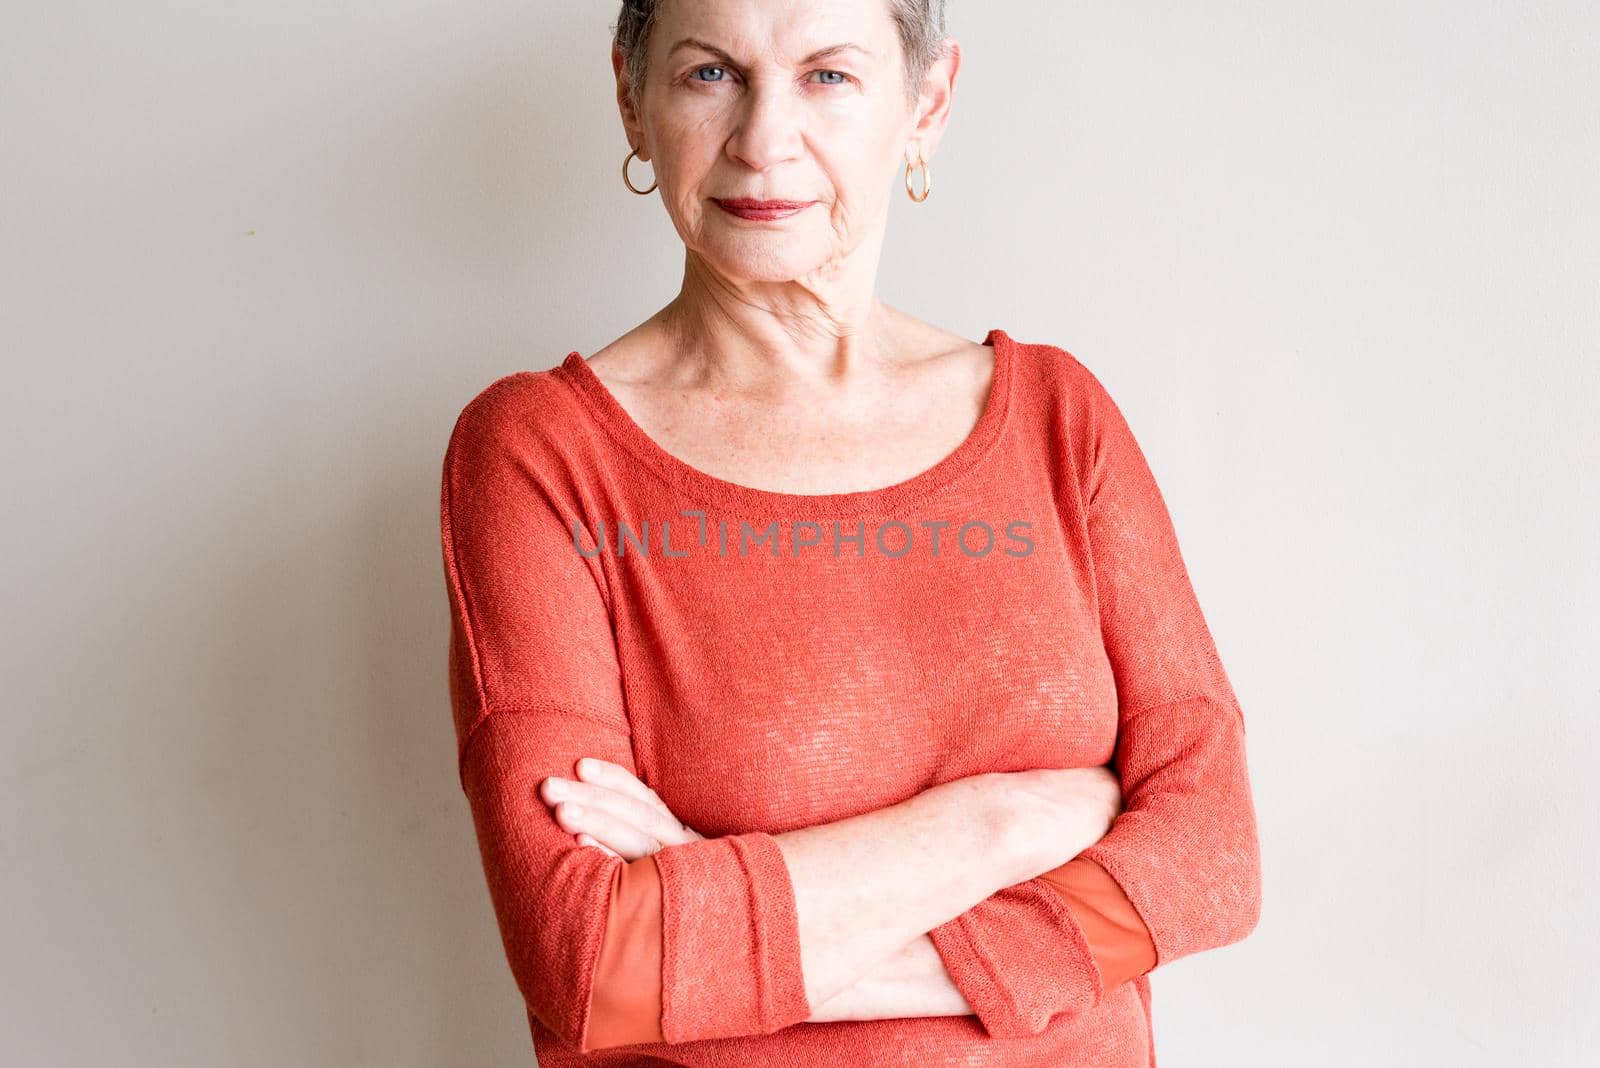 Older woman with short grey hair and orange top with arms crossed